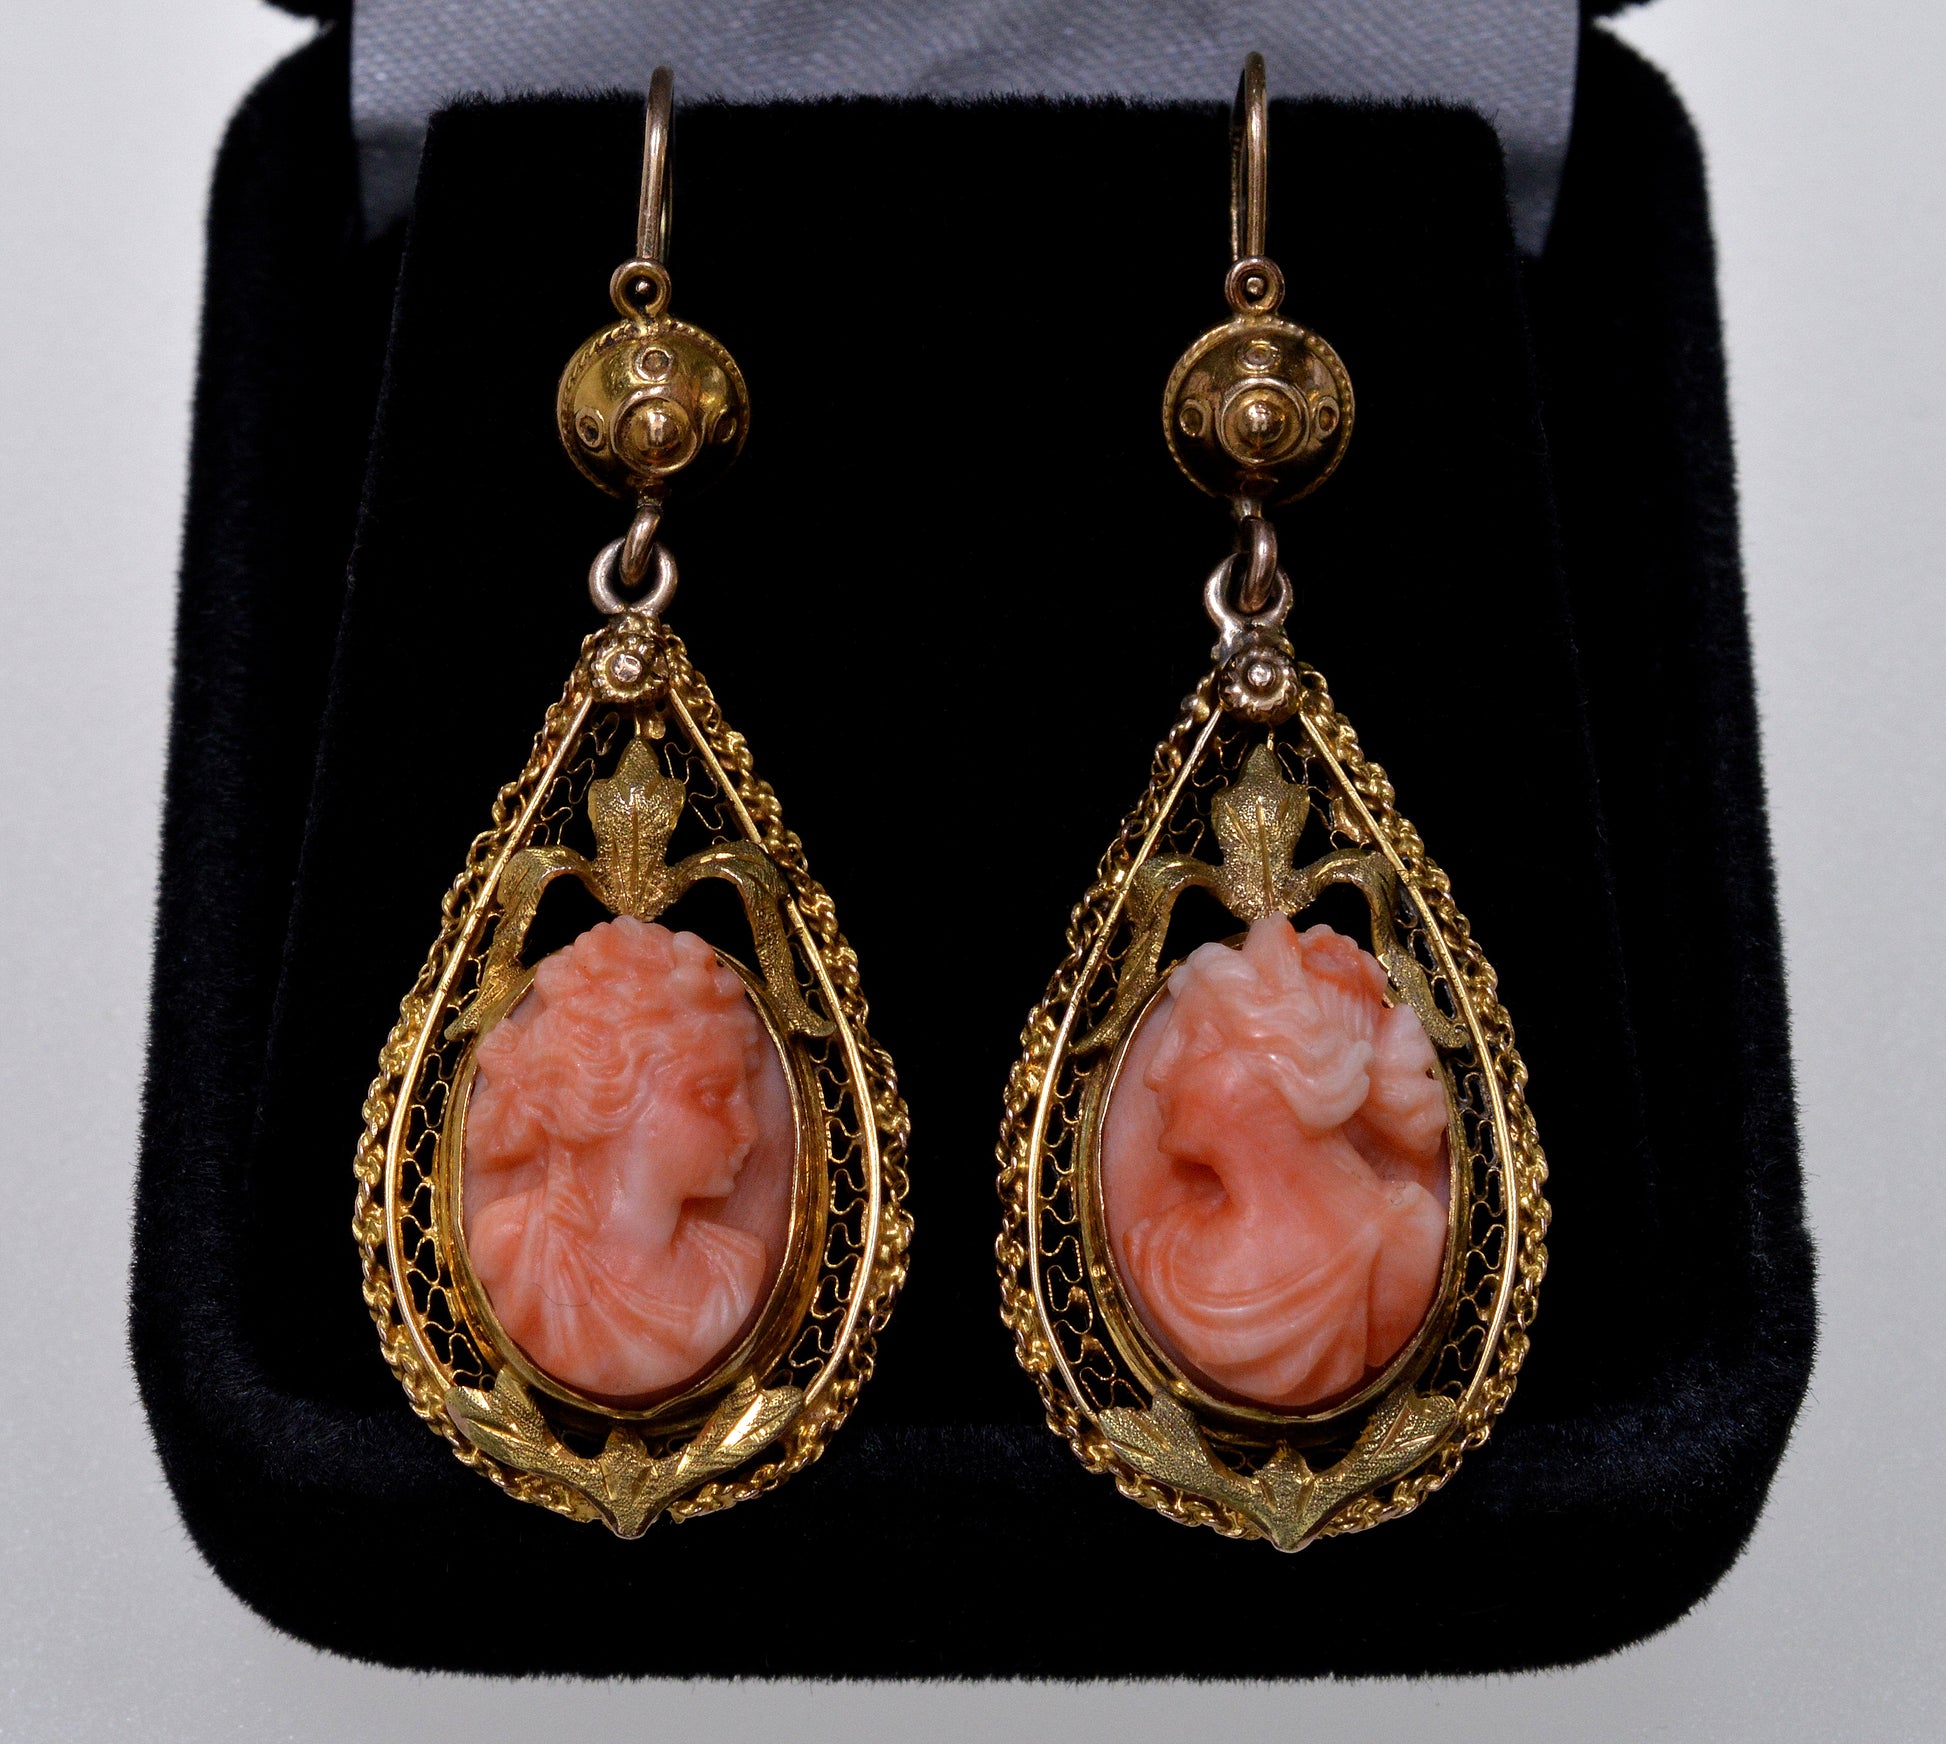 Antique Victorian 14K Gold Coral Cameo Earrings C.1840